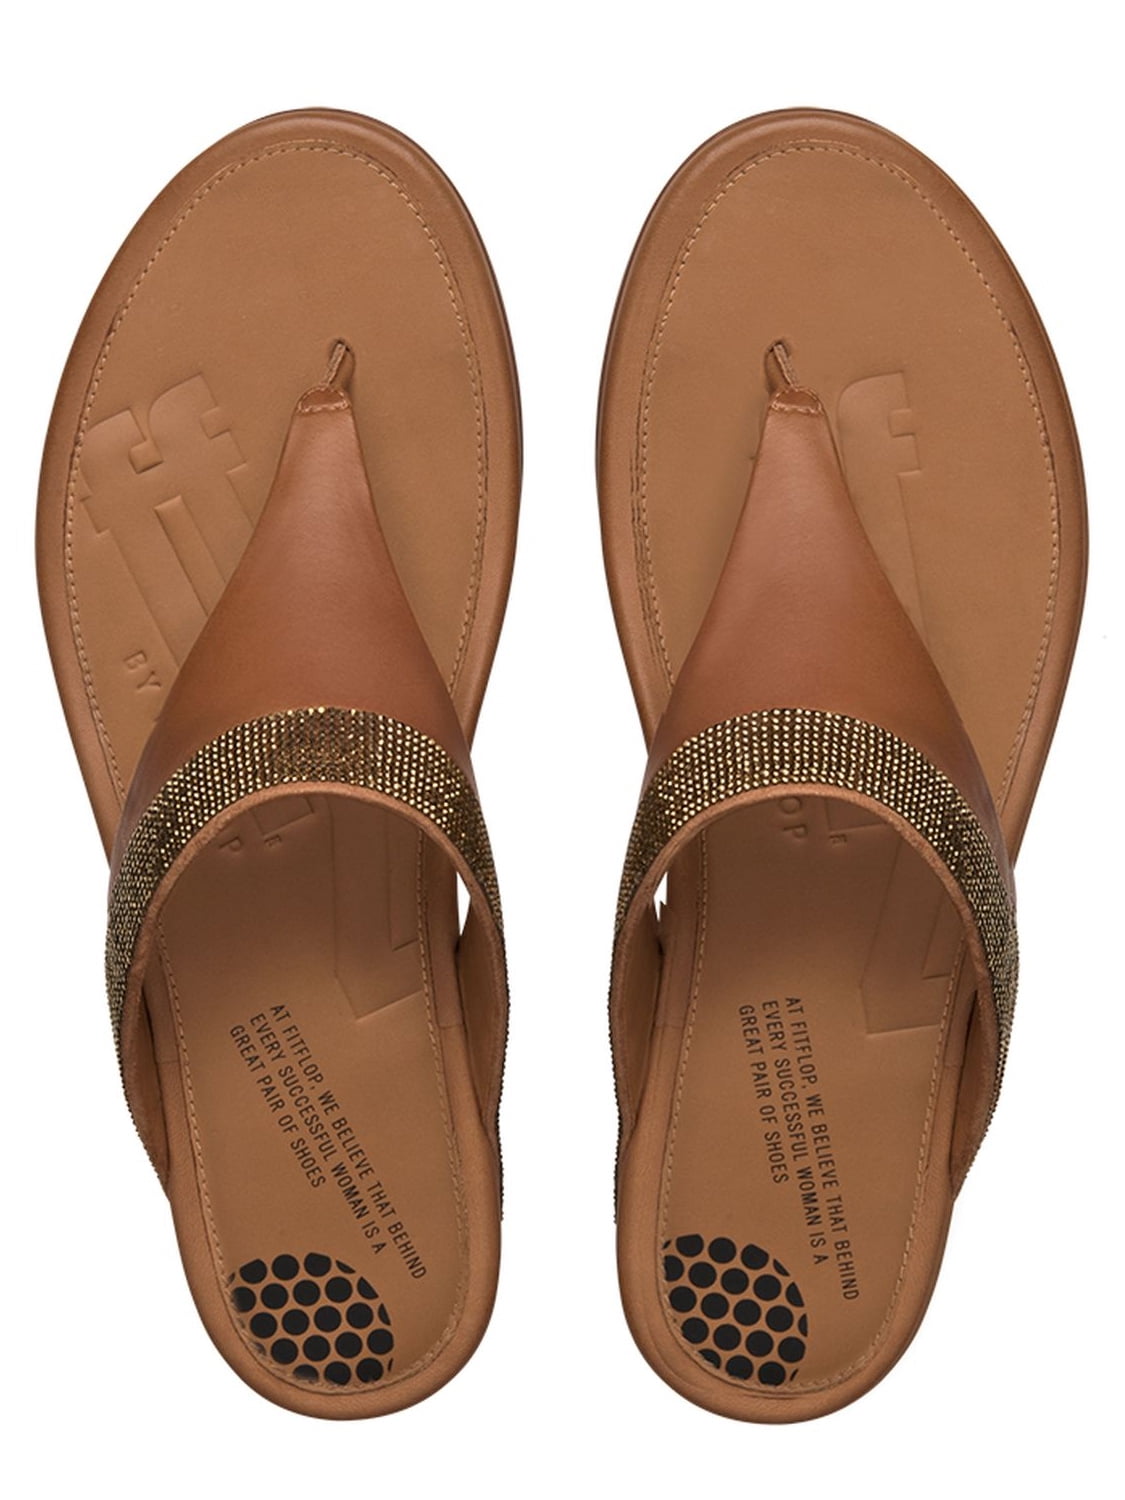 FitFlop - FitFlop™ Women's Banda™ Micro-Crystal Toe-Post Sandals, Tan ...